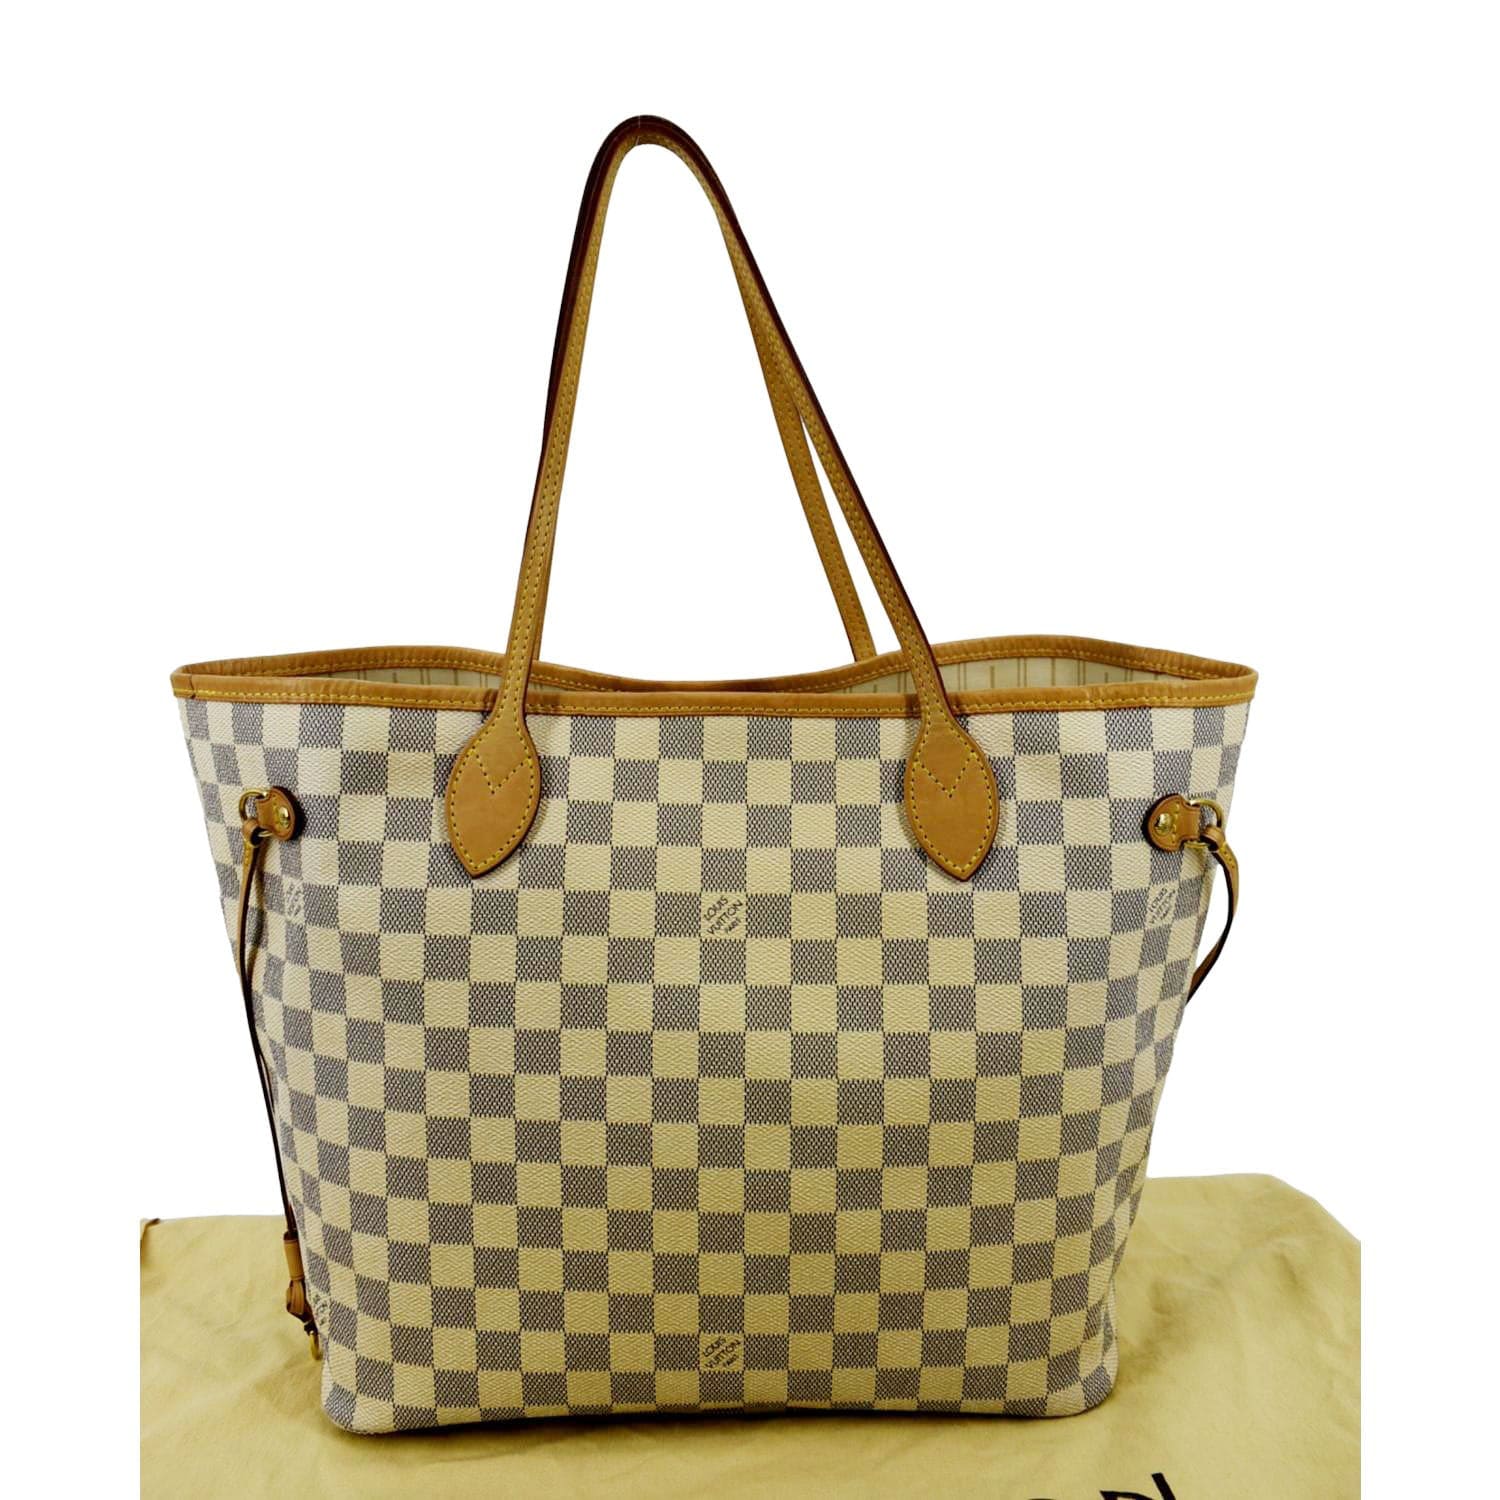 5 Ways To Style Your Louis Vuitton Neverfull